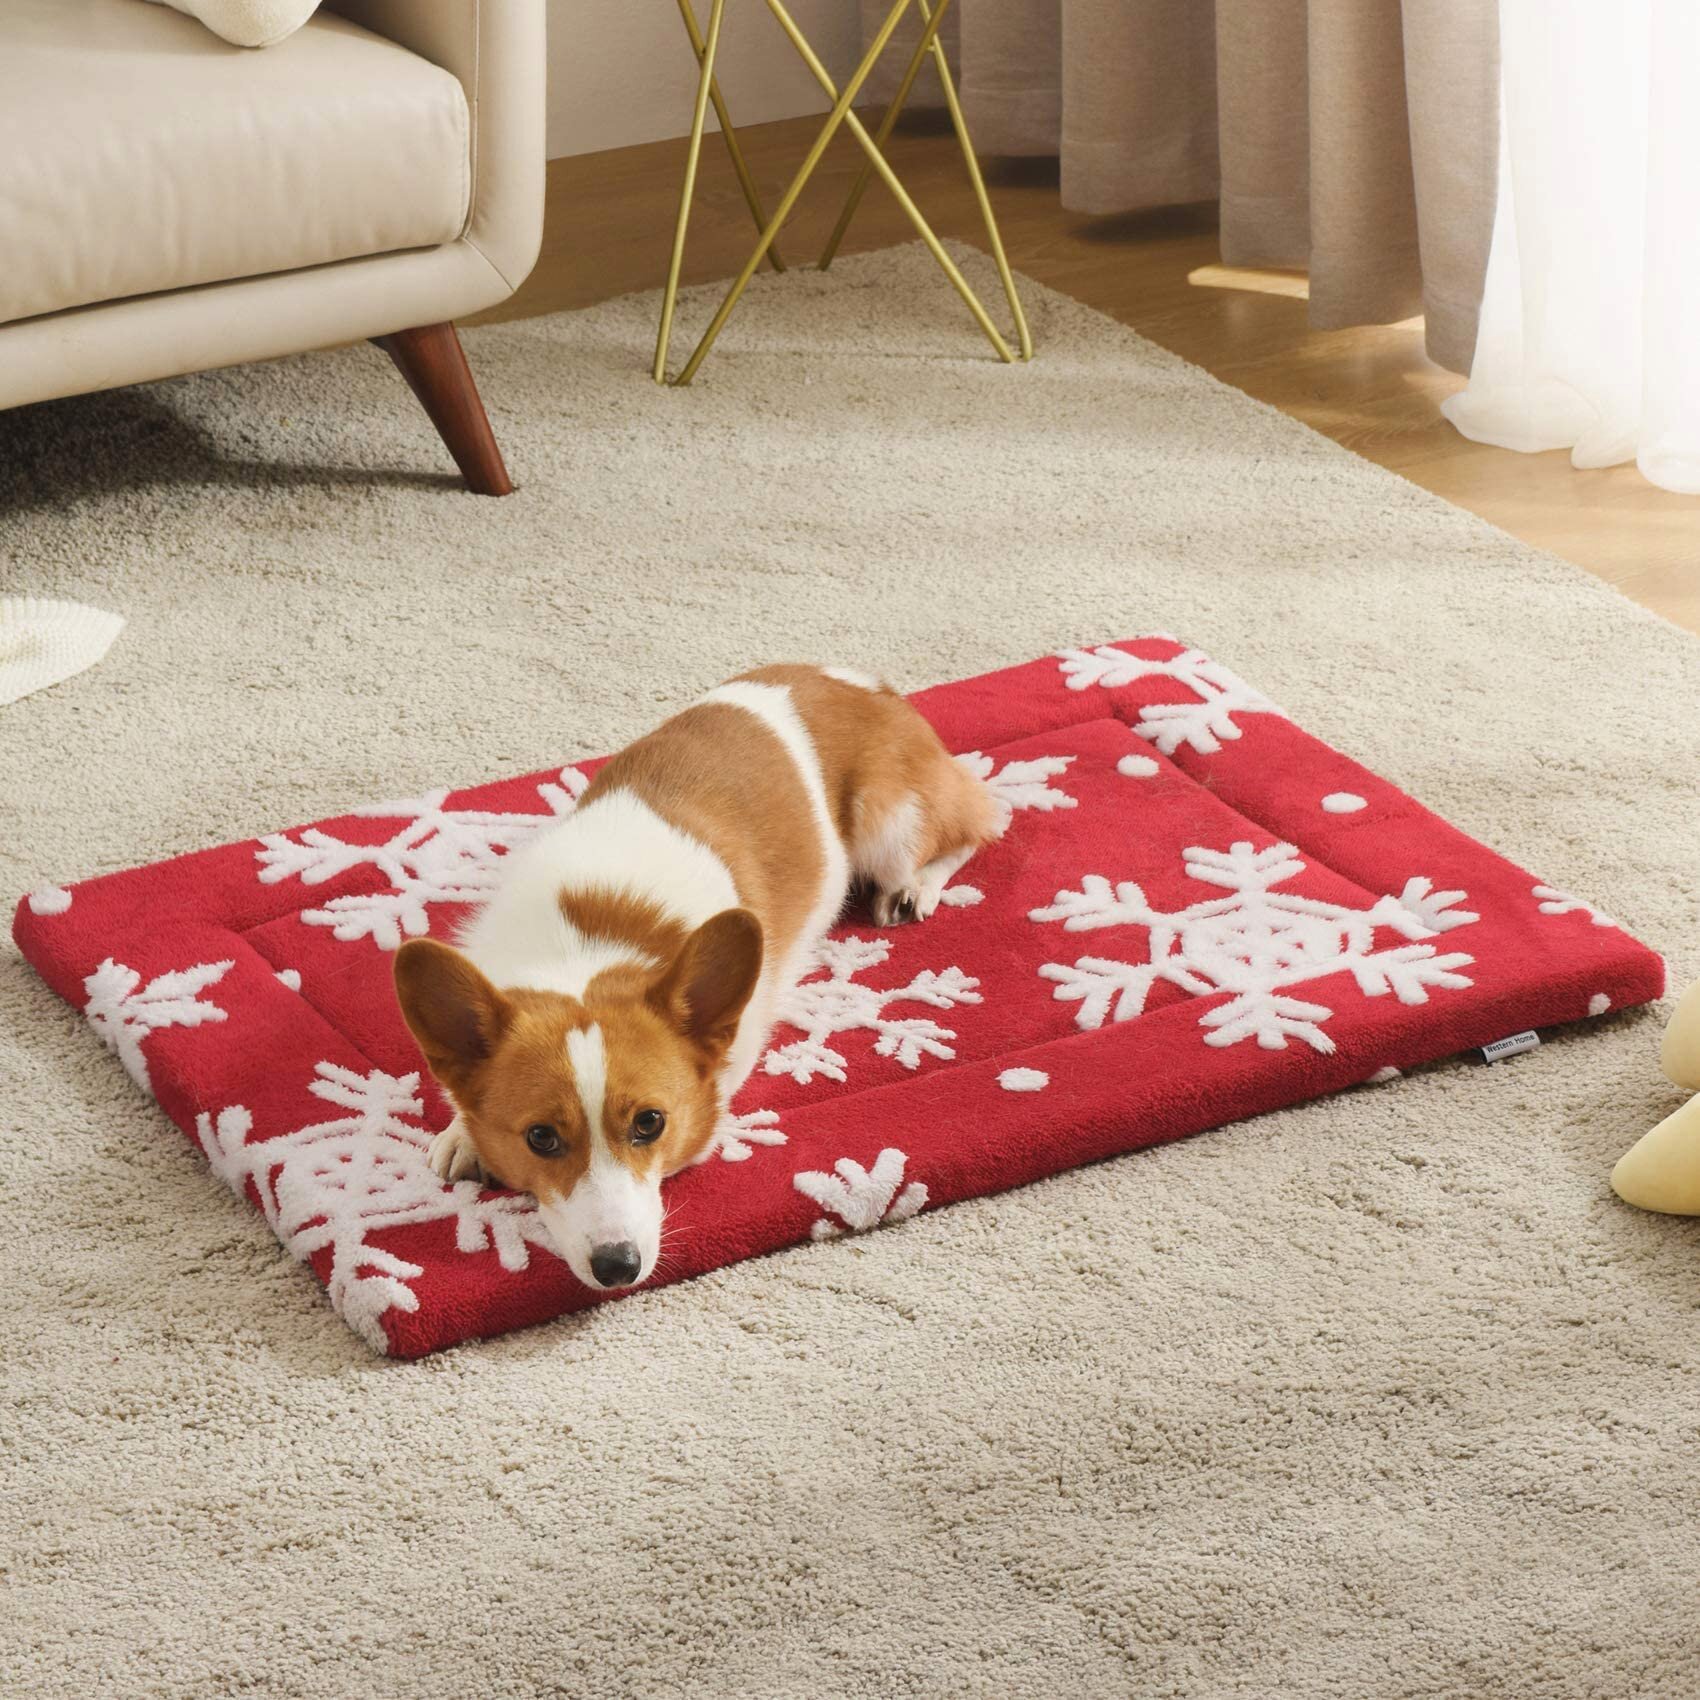 Soft Fleece Dog Bed Mat for Dog Cage Cushion Mattress Basket Kennel Small Large